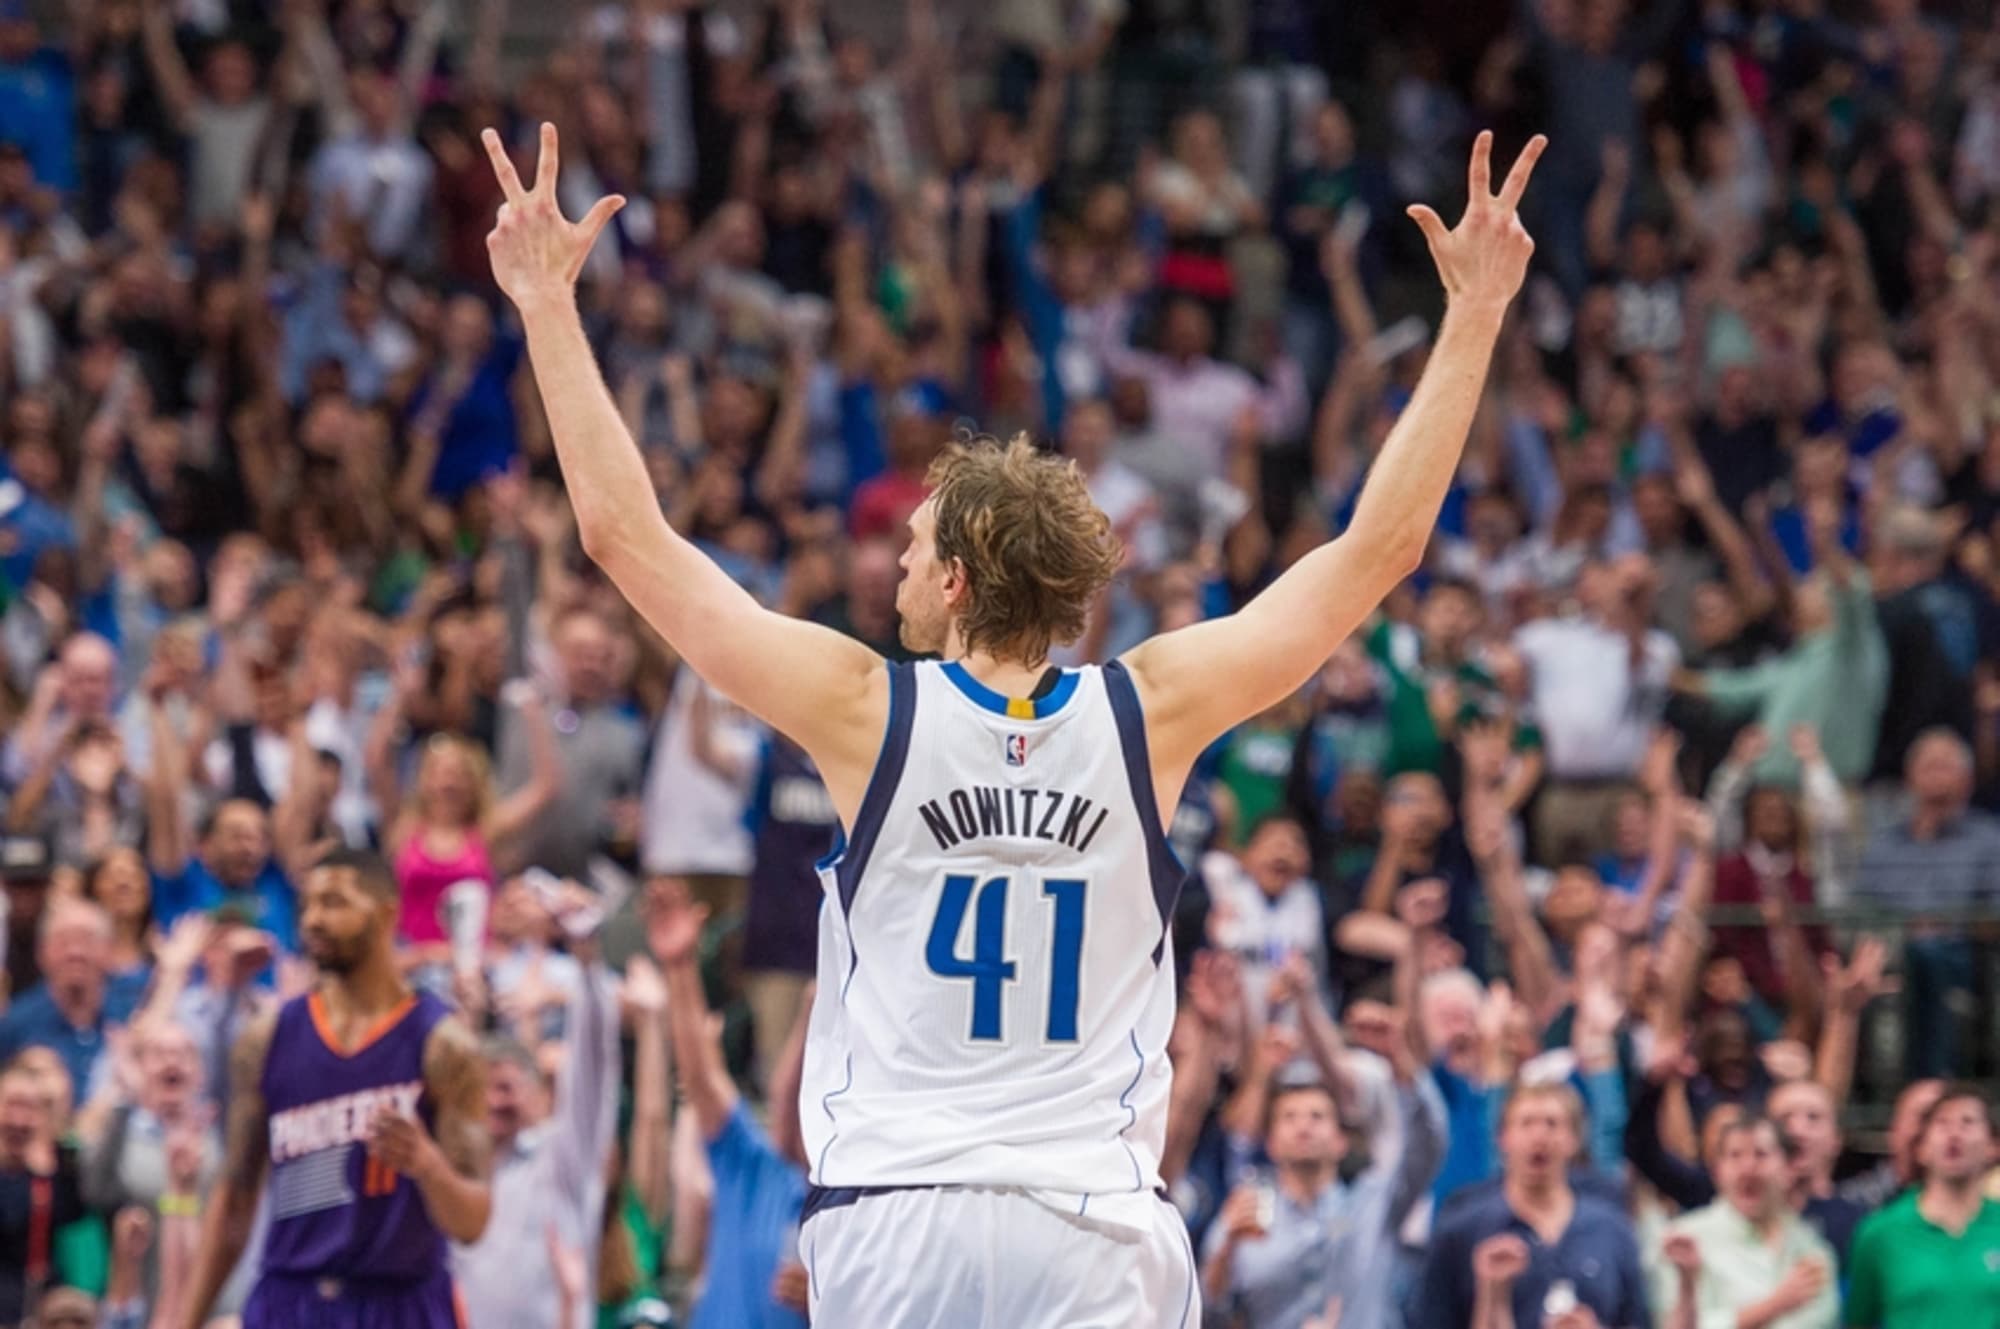 The Dirk Nowitzki stories: An oral history of the Dallas Mavericks